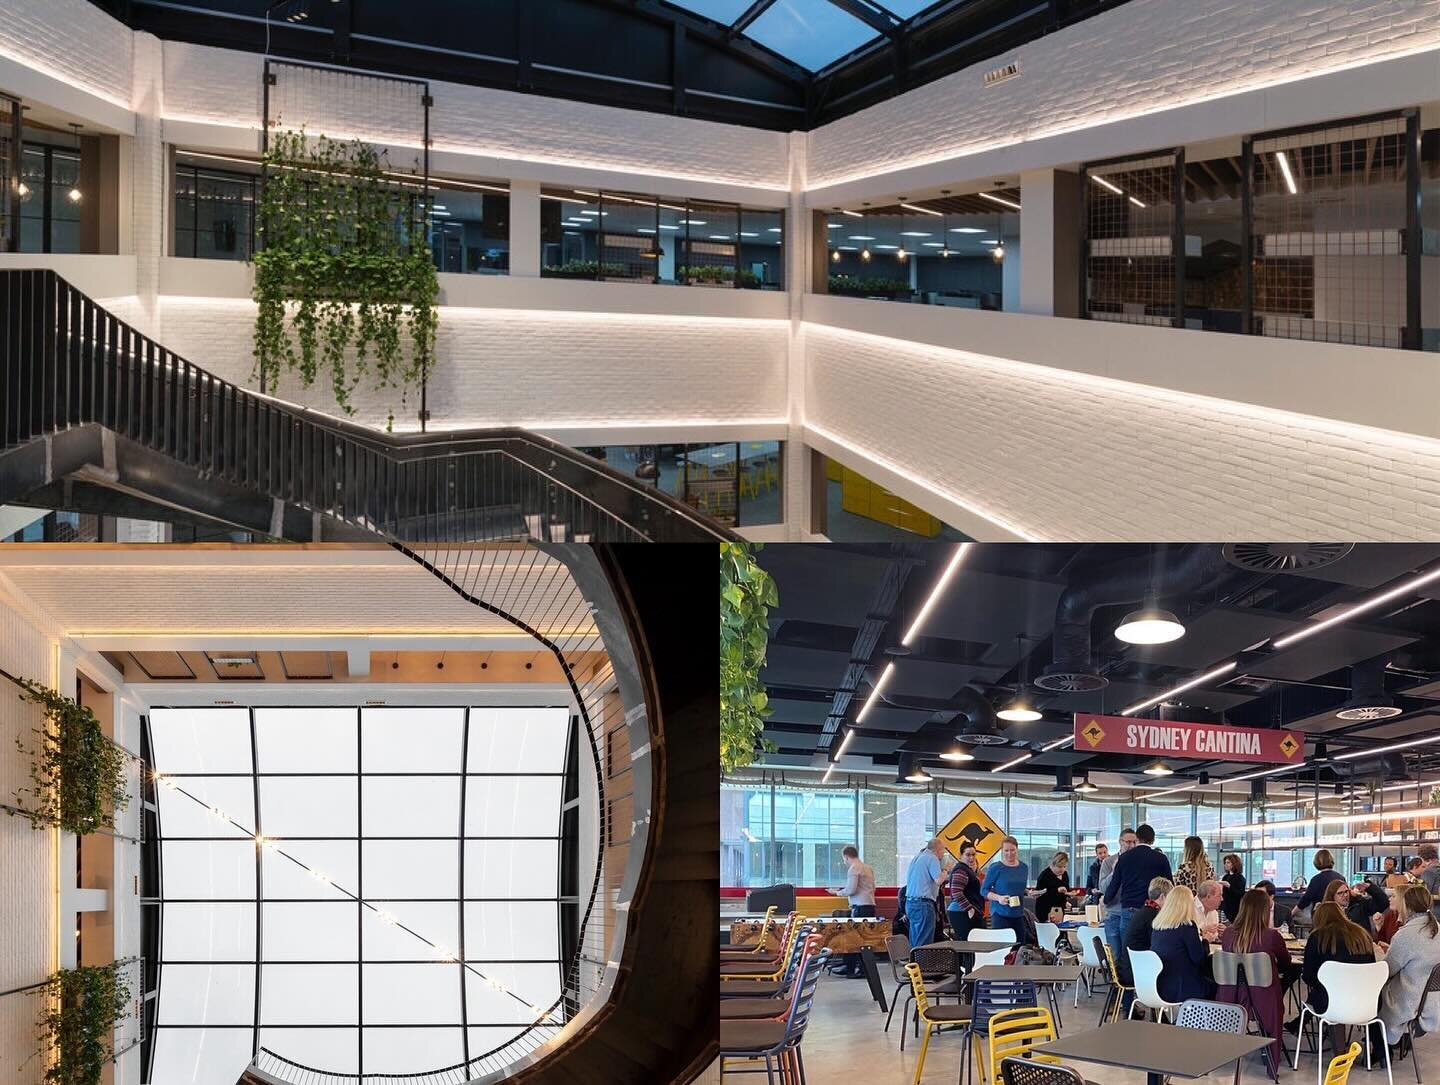 Access to natural light and views. An integral part of all our projects!
#workplacewellbeing #officedesign #workplaceexperience #rethinkingtheworkplace